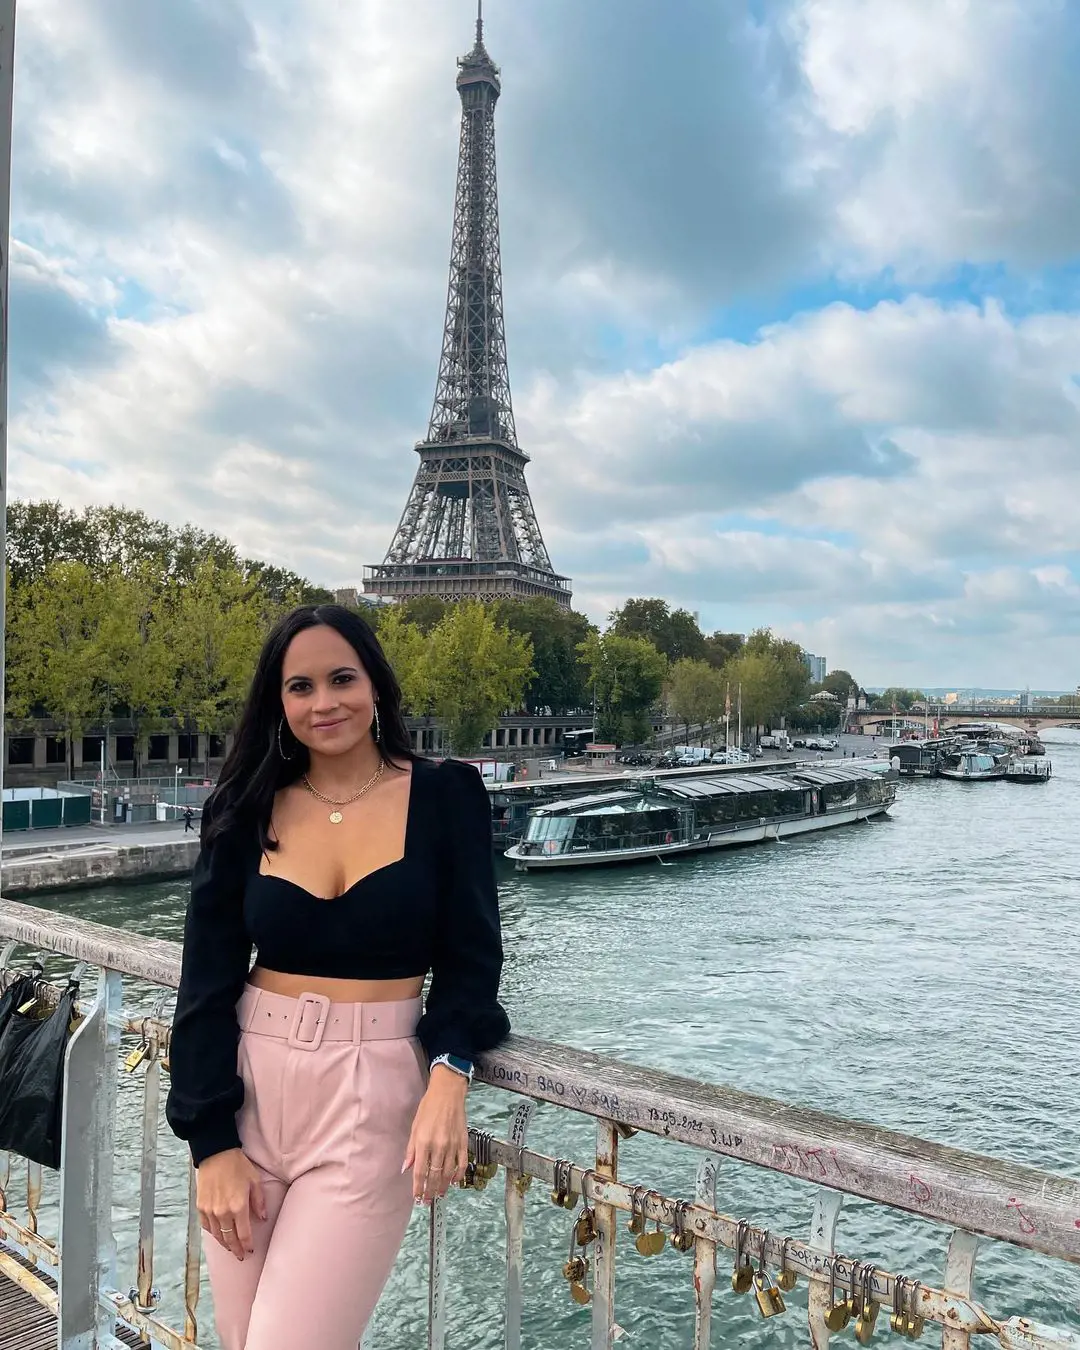 Auston older sis Alexandria posing in front of the Eiffel Tower during her stay at Paris, France in October 2021